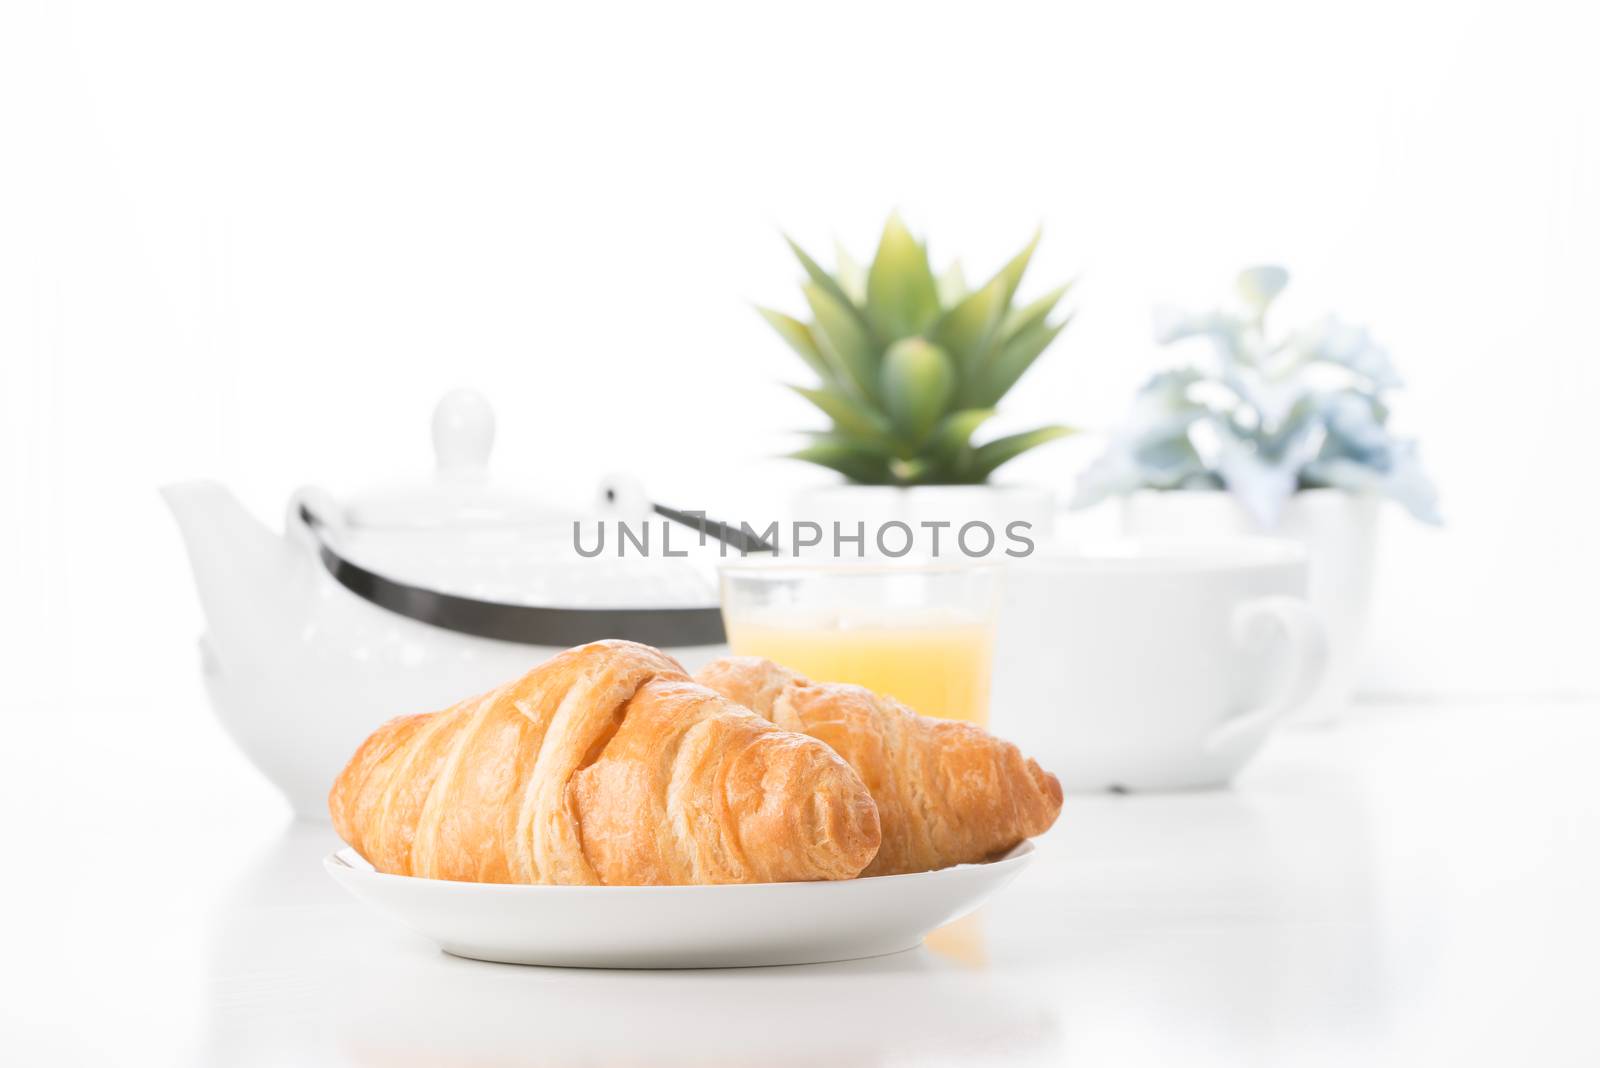 Delicate croissants presented in a breakfast type setting.